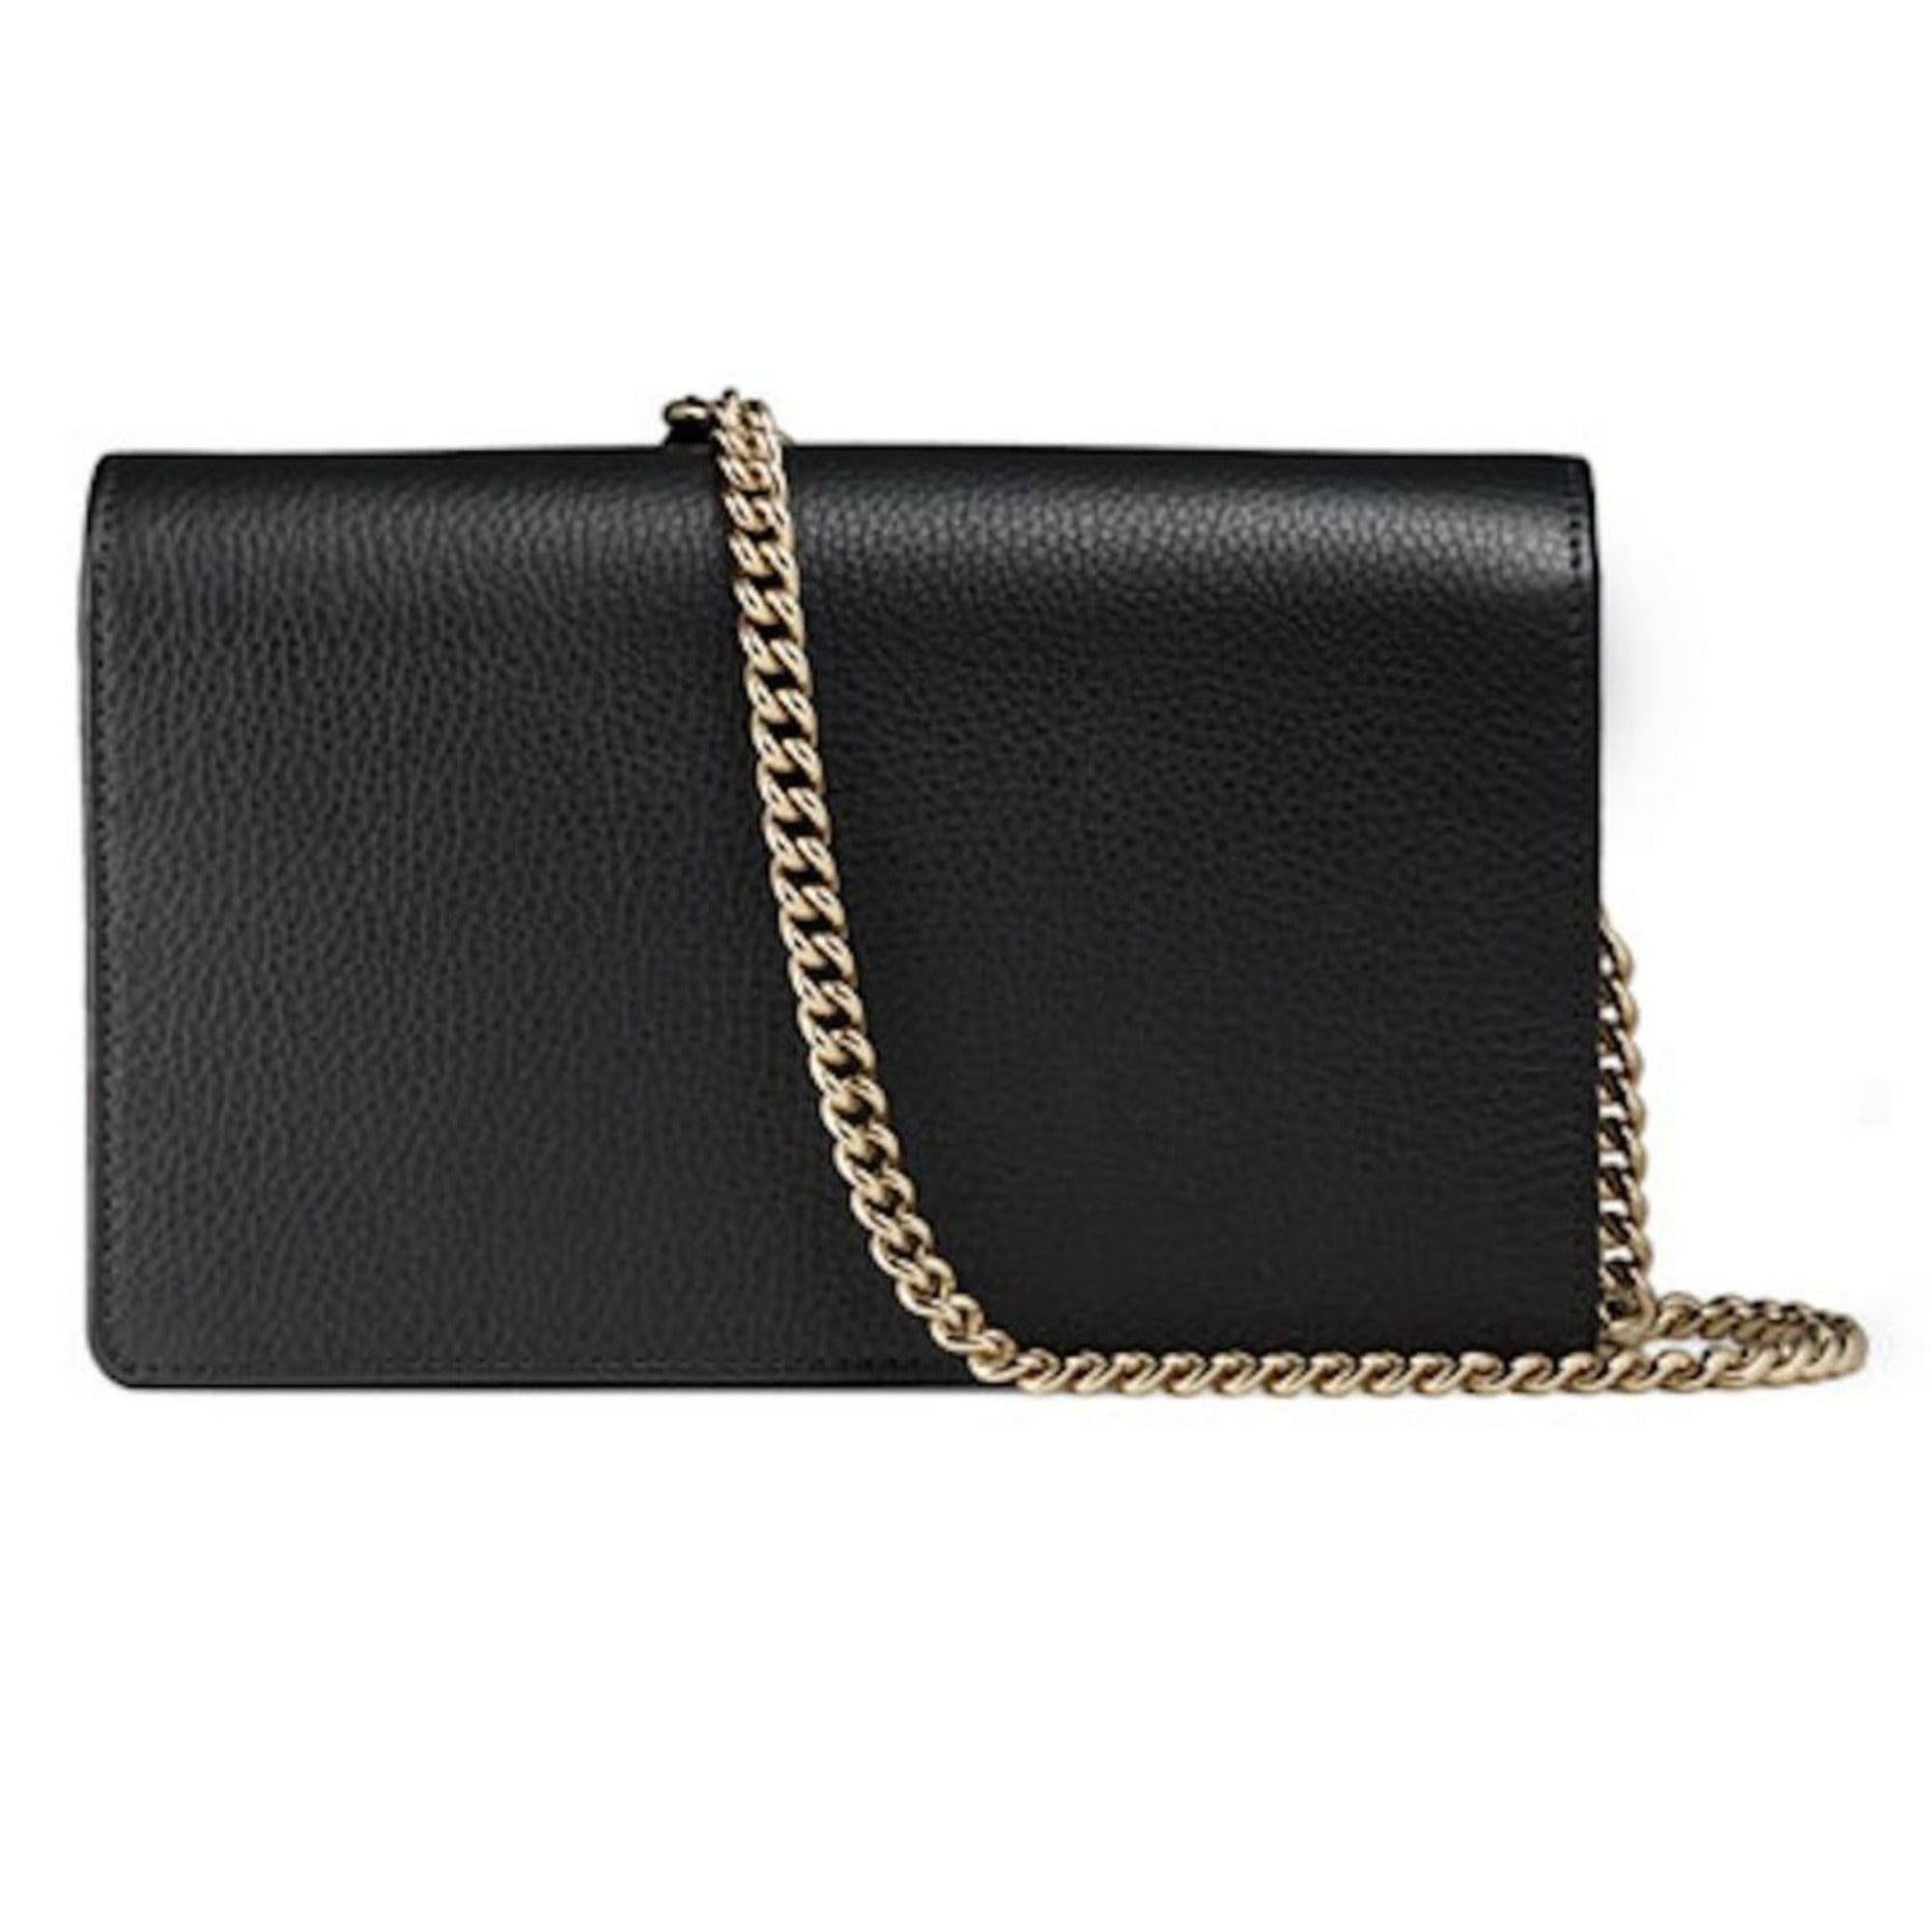 Gucci Soho Wallet on Chain Black Leather Cross Body Bag 598211 407041 at_Queen_Bee_of_Beverly_Hills